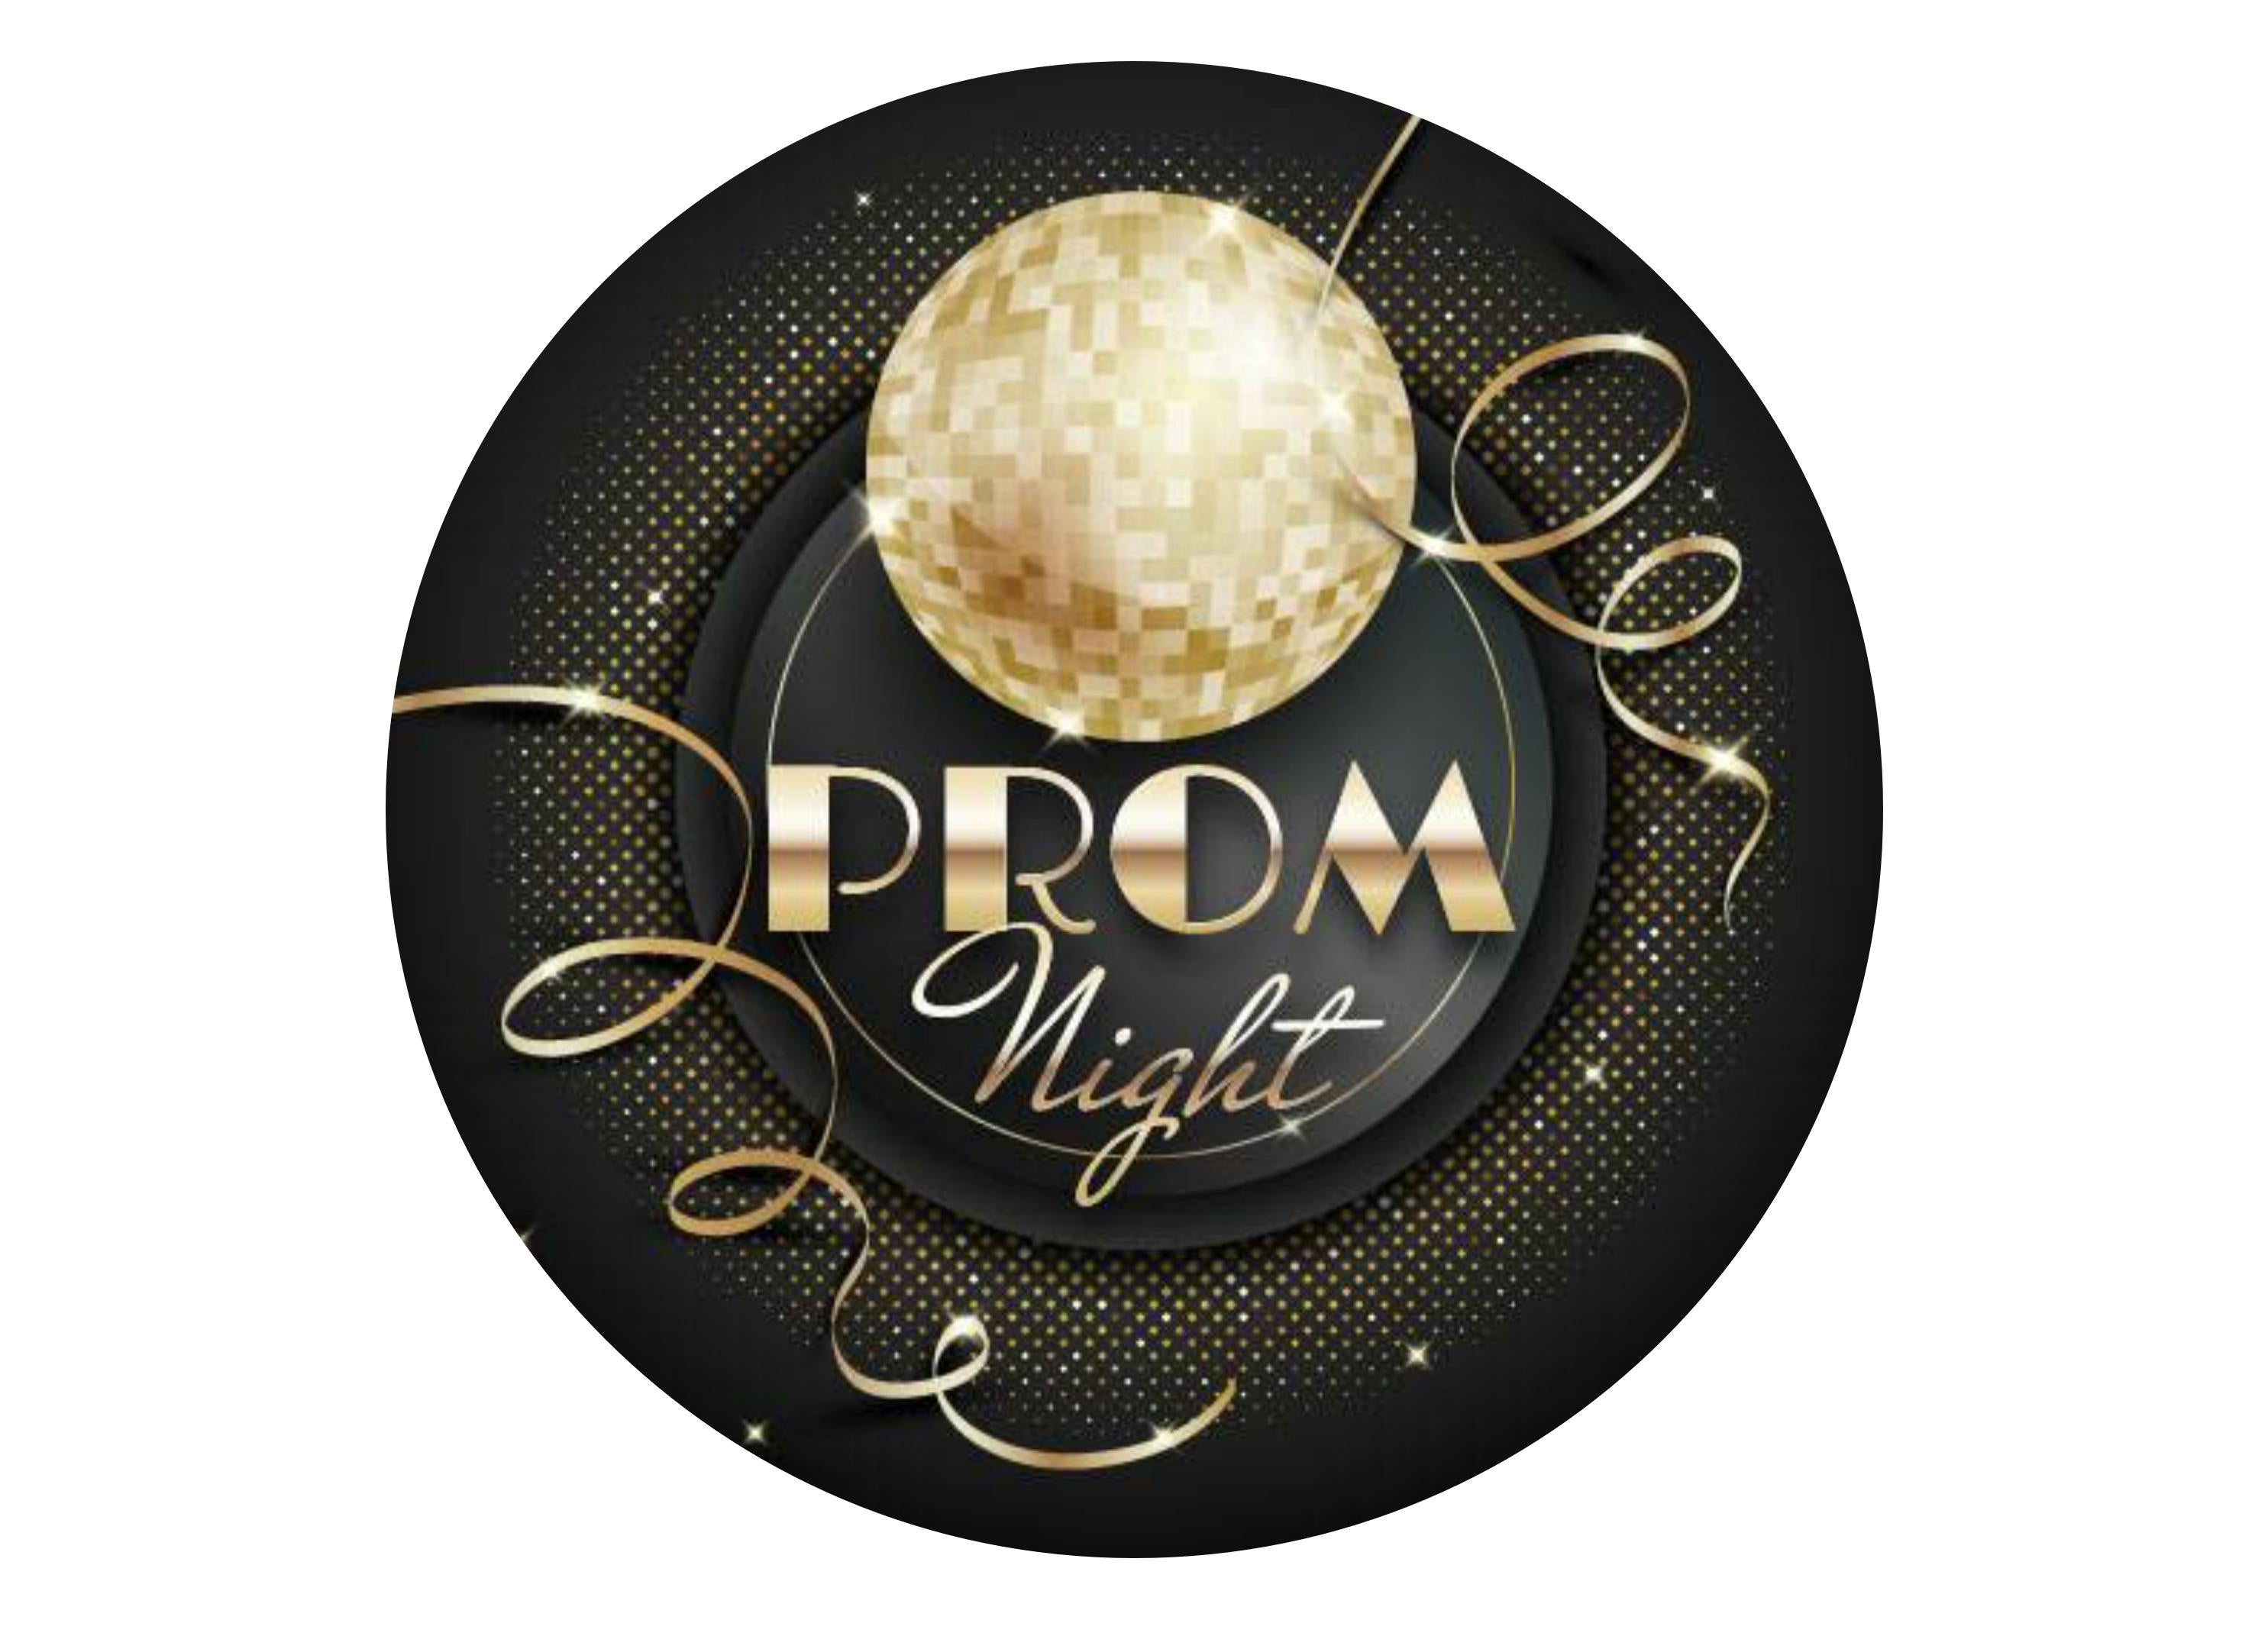 large Prom night cake topper in black and gold with glitter ball